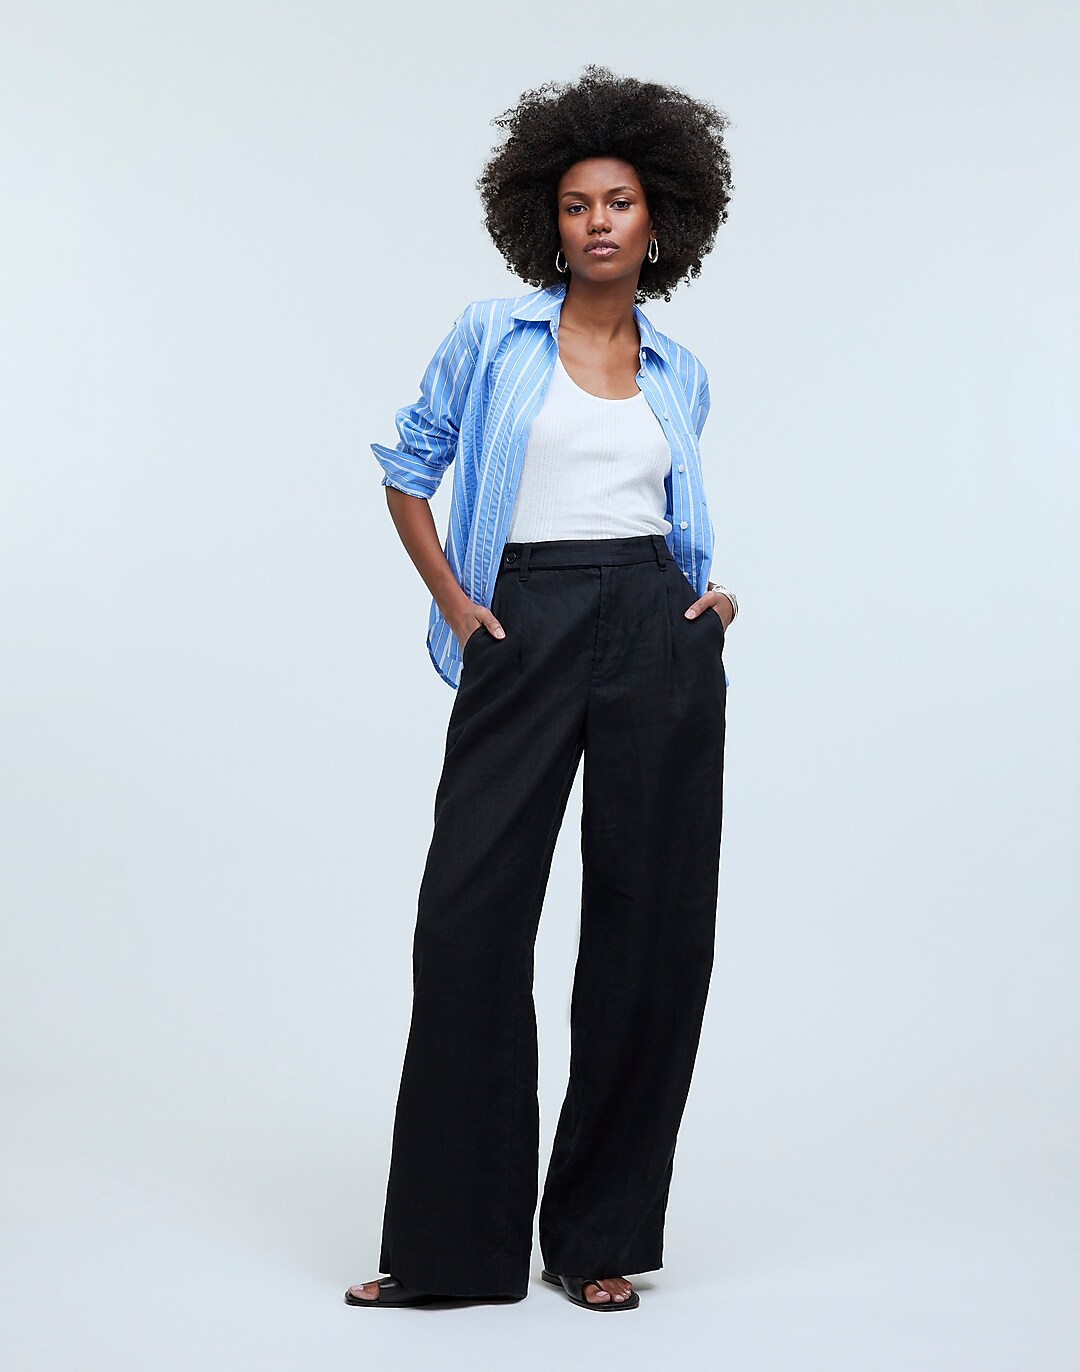 Madewell Work Pants Review  Harlow Wide-Leg Pant and Petite Perfect Vintage  Jean - Makeup and Beauty Blog